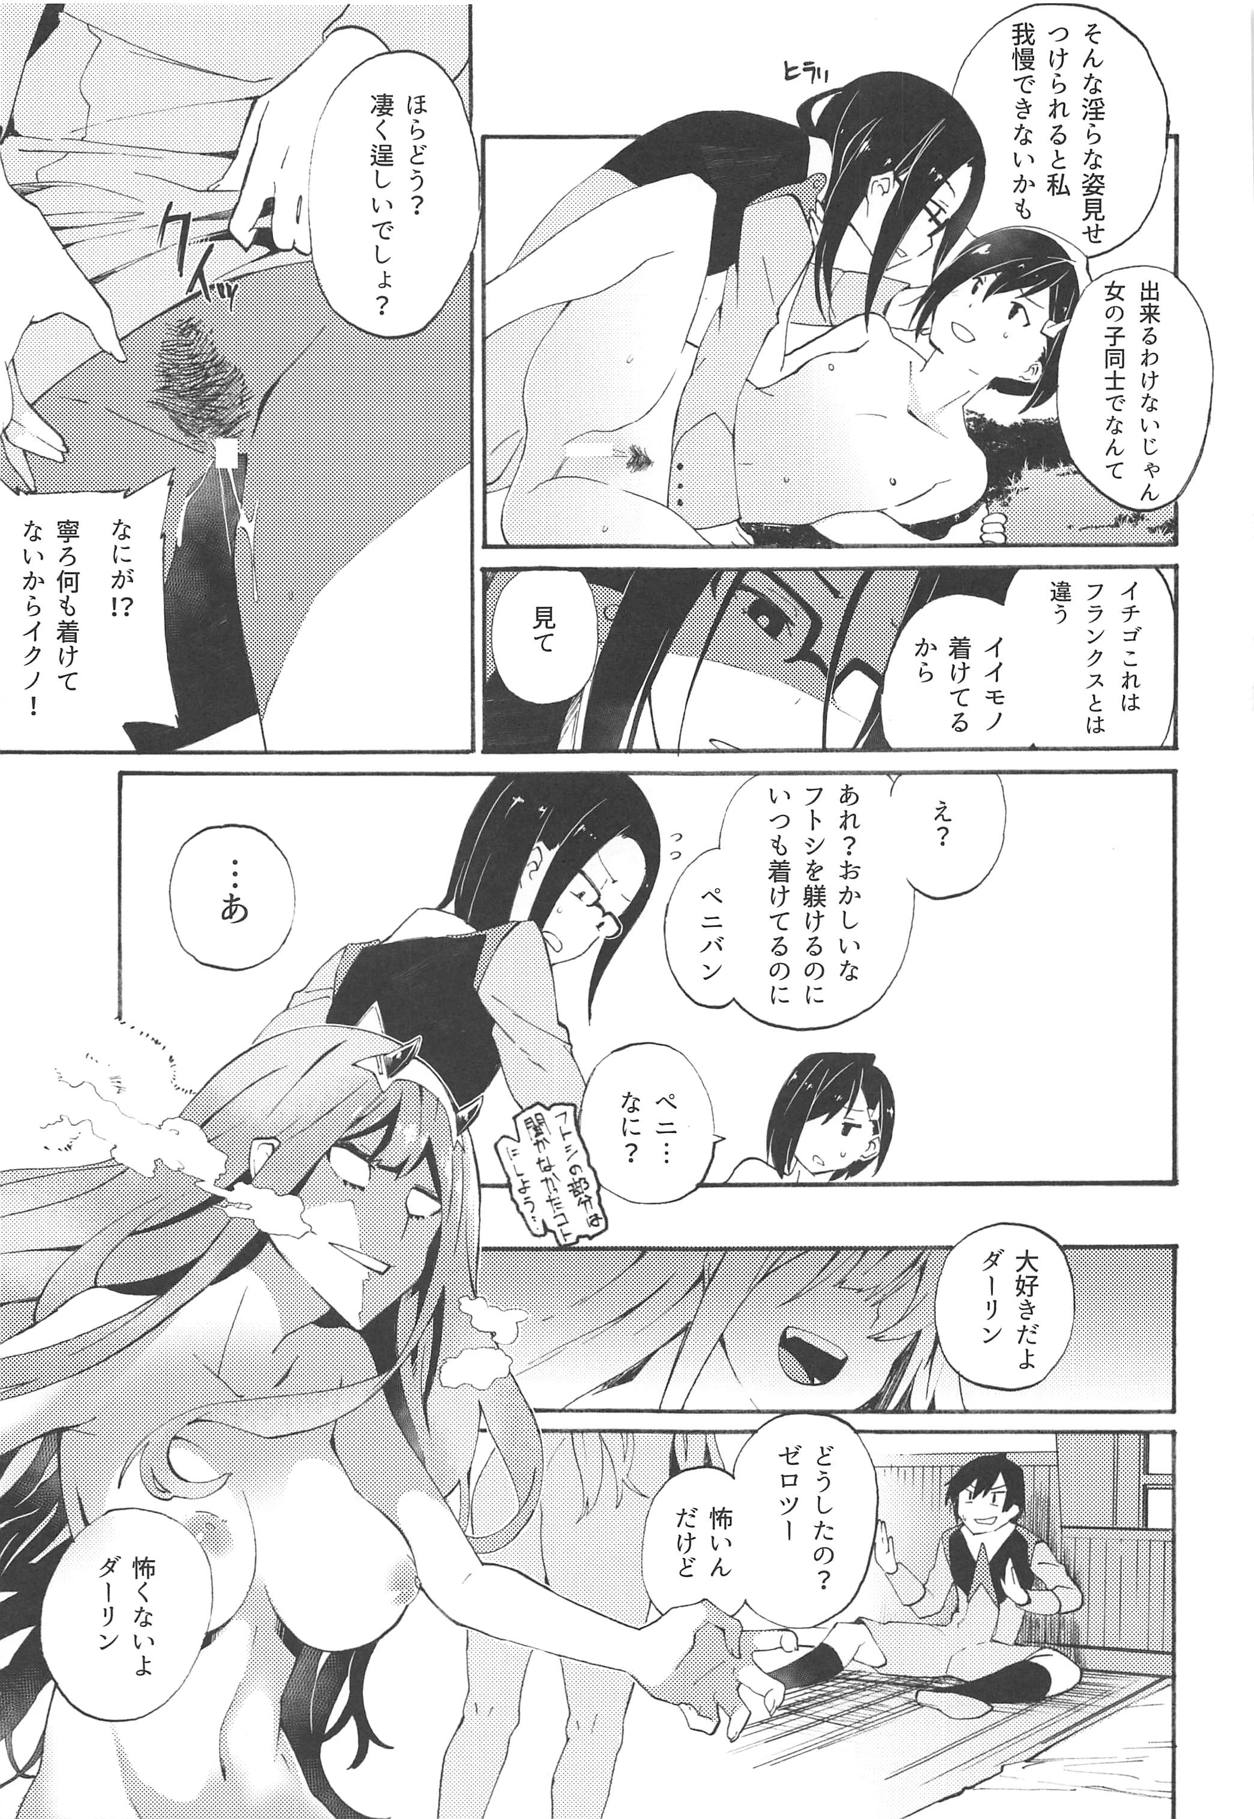 (CT33) [Sagano Line (Bittsu, Max)] KISS OF EROS (DARLING in the FRANXX) page 22 full